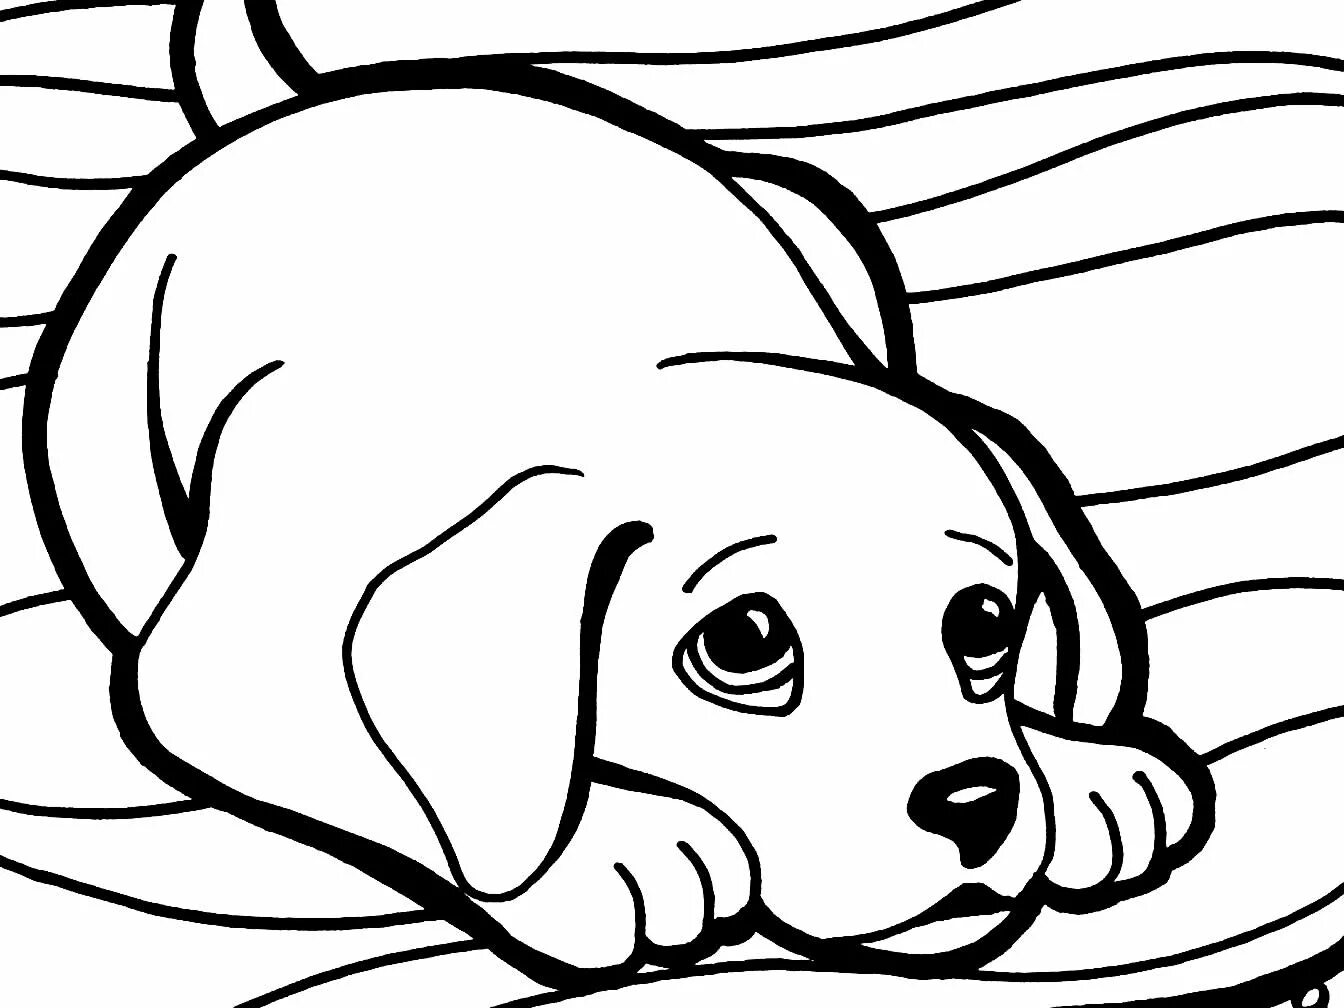 Fluffy cat and dog coloring pages for kids